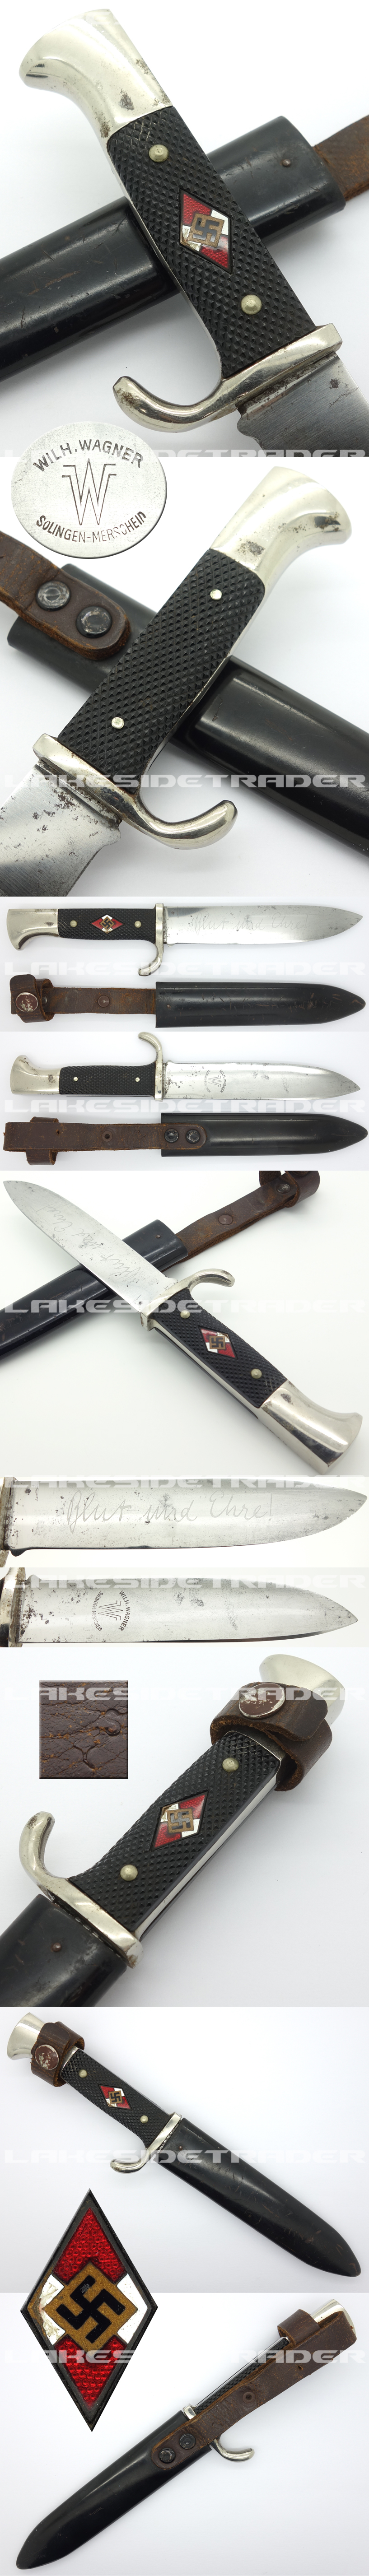 Early Hitler Youth Knife by Wilh. Wagner